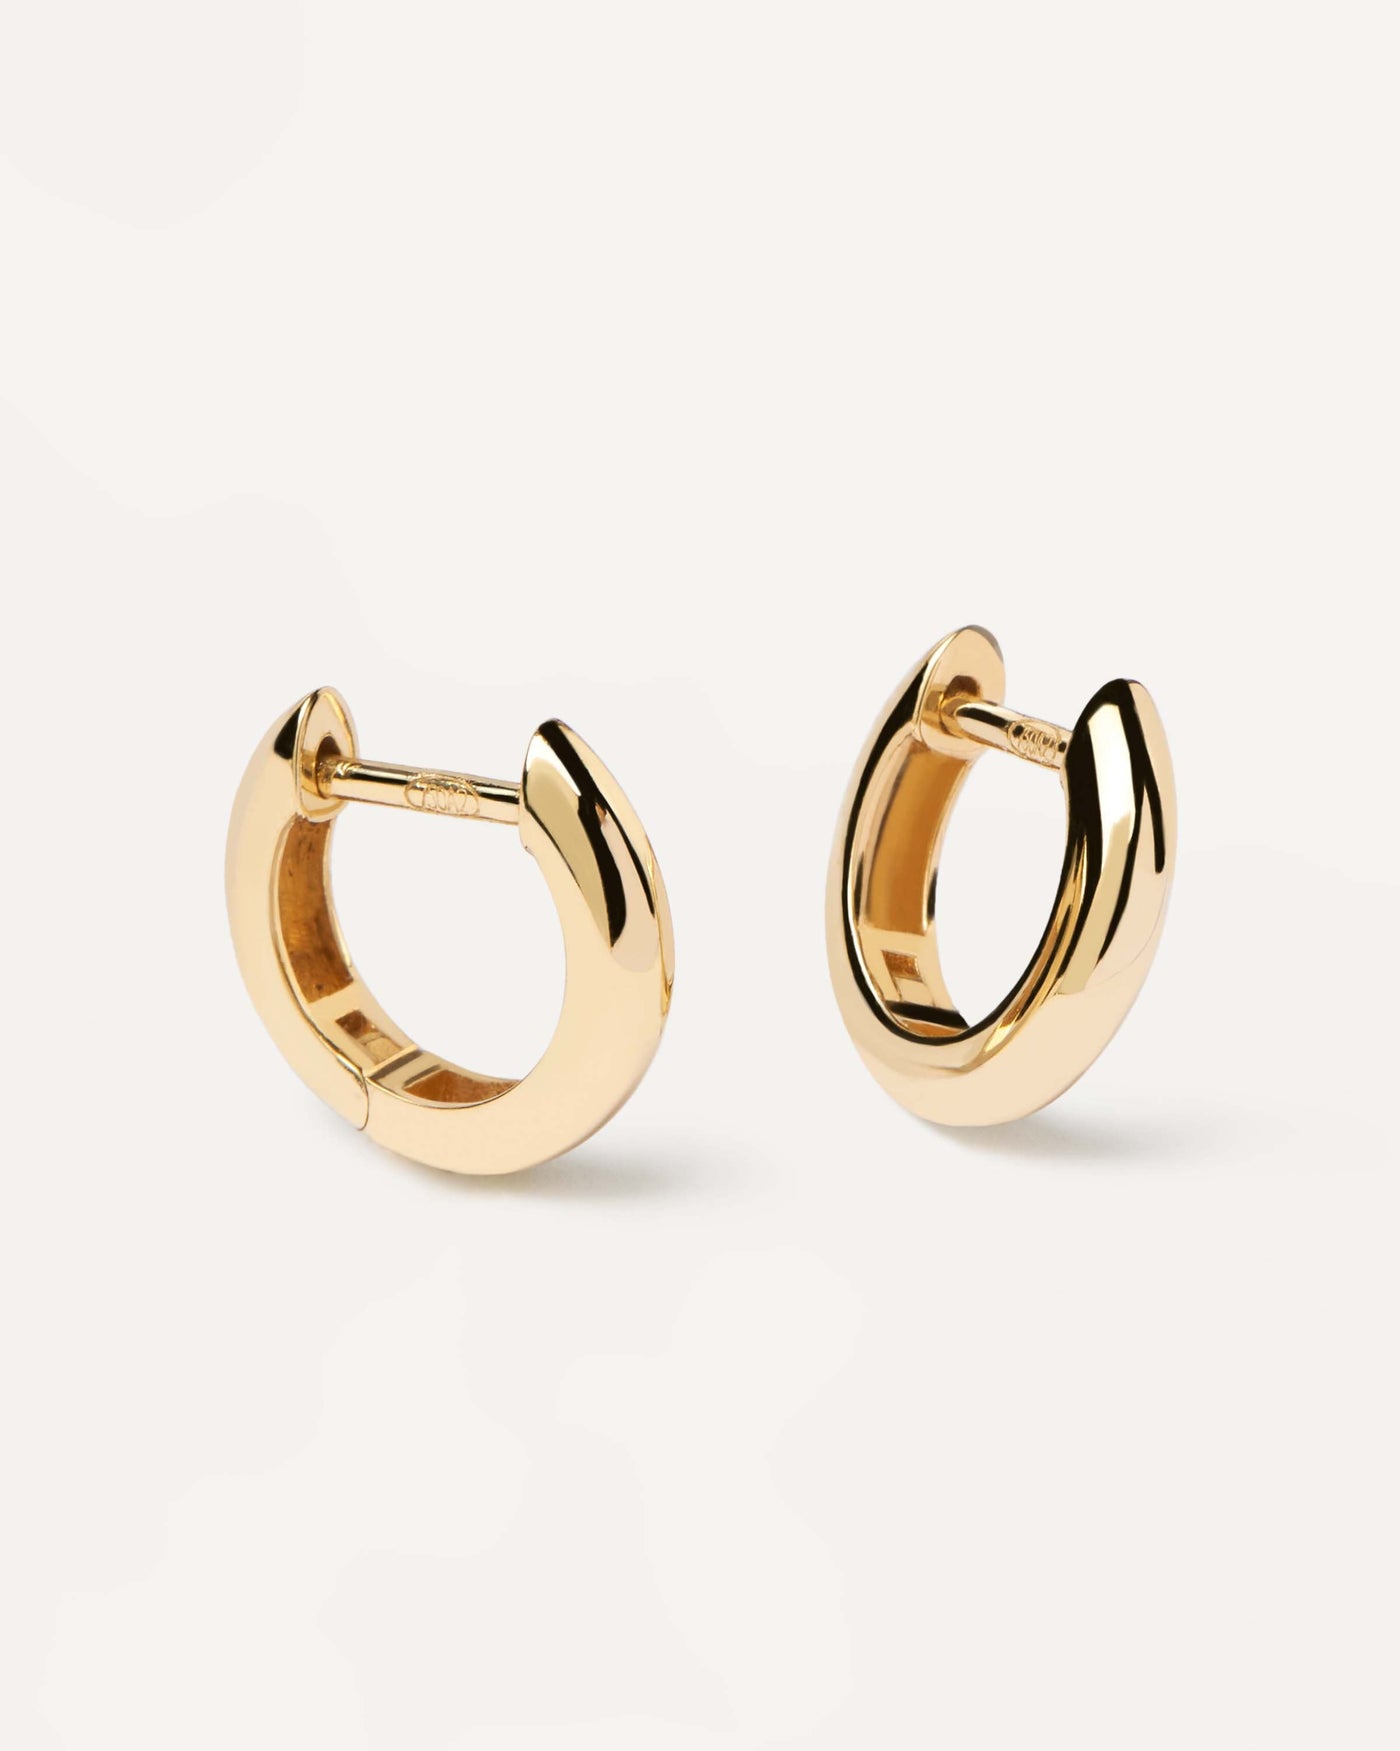 2023 Selection | Gold Bold Mini Hoops. Plain solid yellow gold small hoops made of recycled gold. Get the latest arrival from PDPAOLA. Place your order safely and get this Best Seller. Free Shipping.